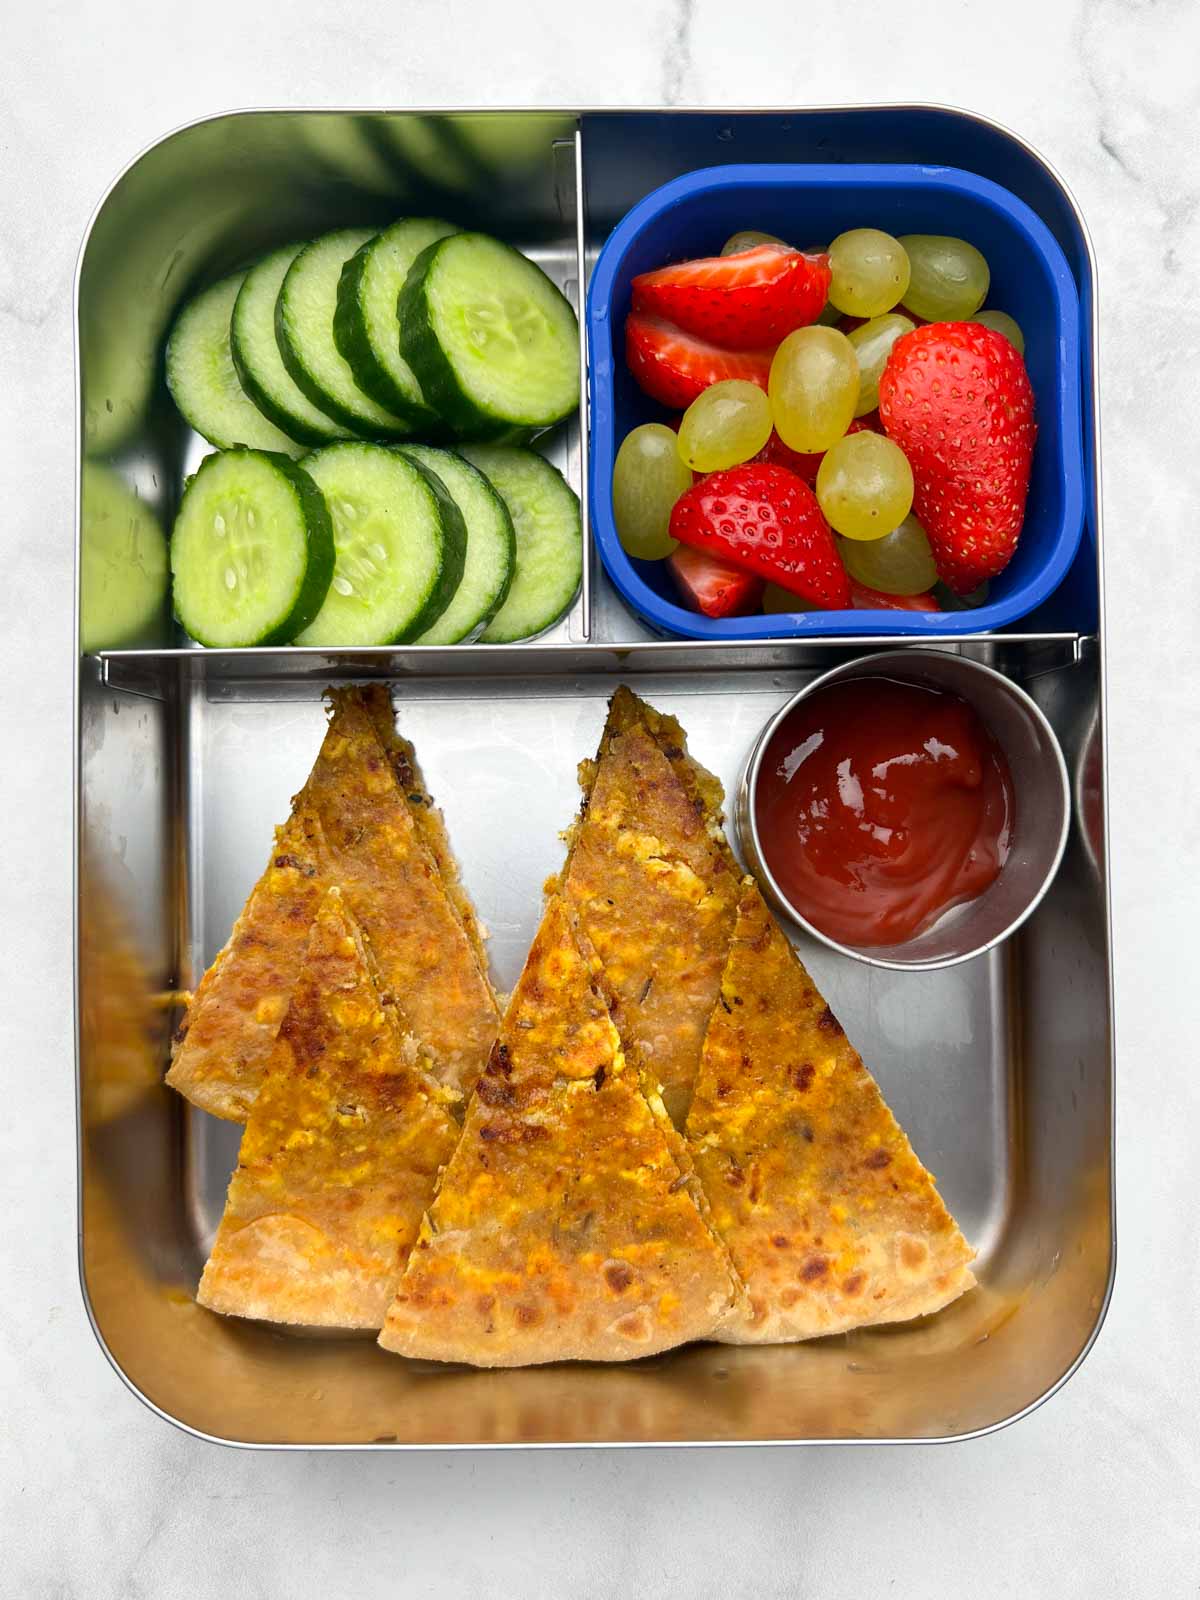 kids lunch box paneer paratha with cucumber and fruits